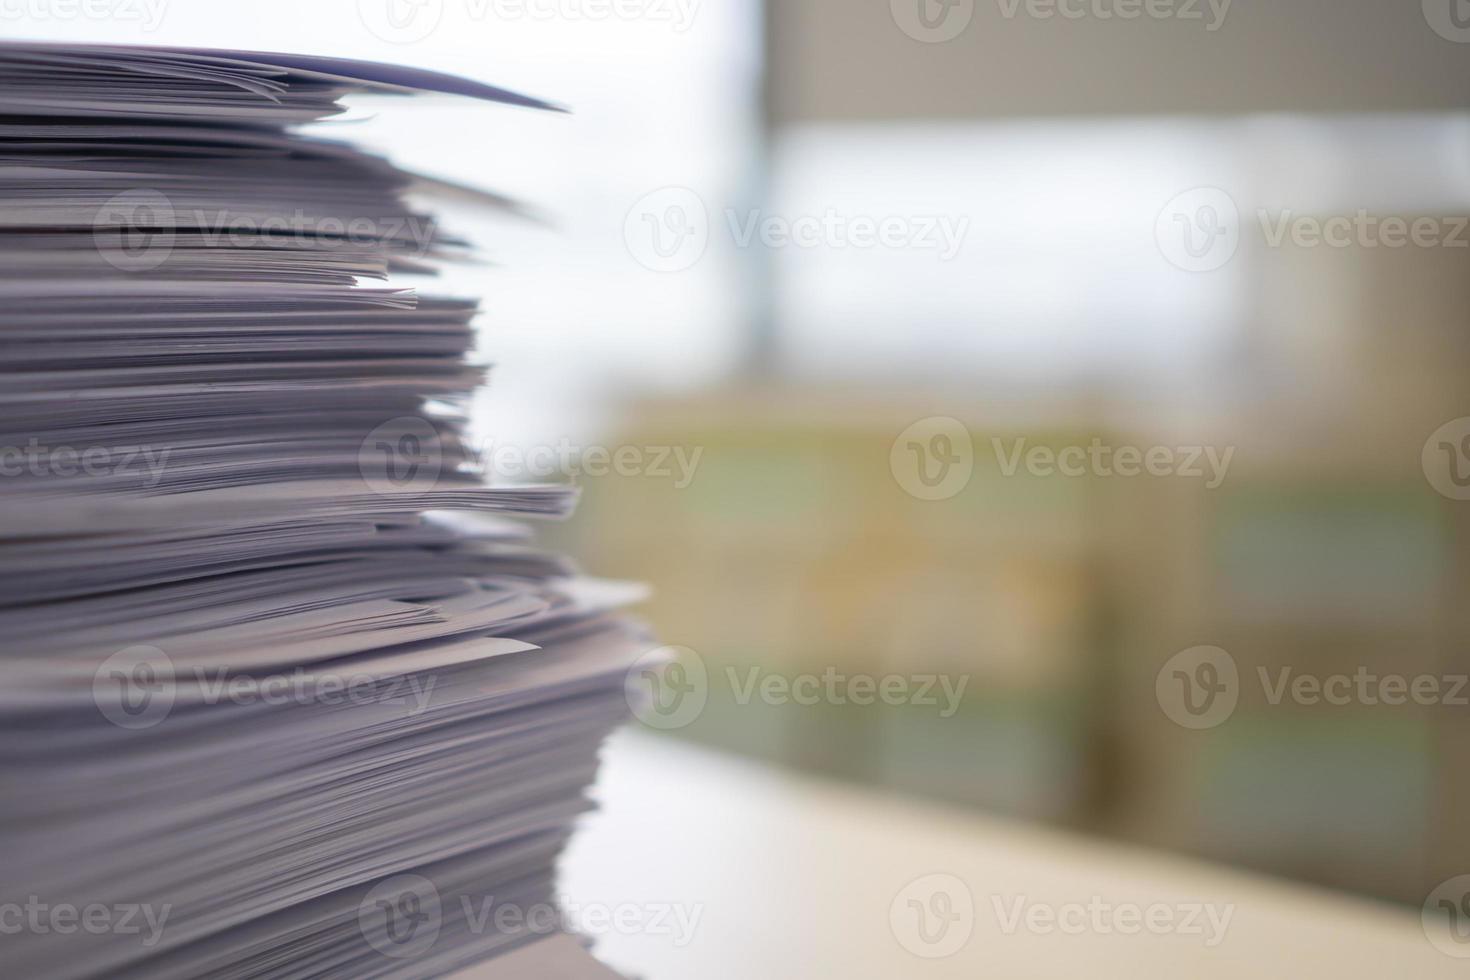 Stack of paper, Document, many jobs waiting to be done on the table, busy concept photo